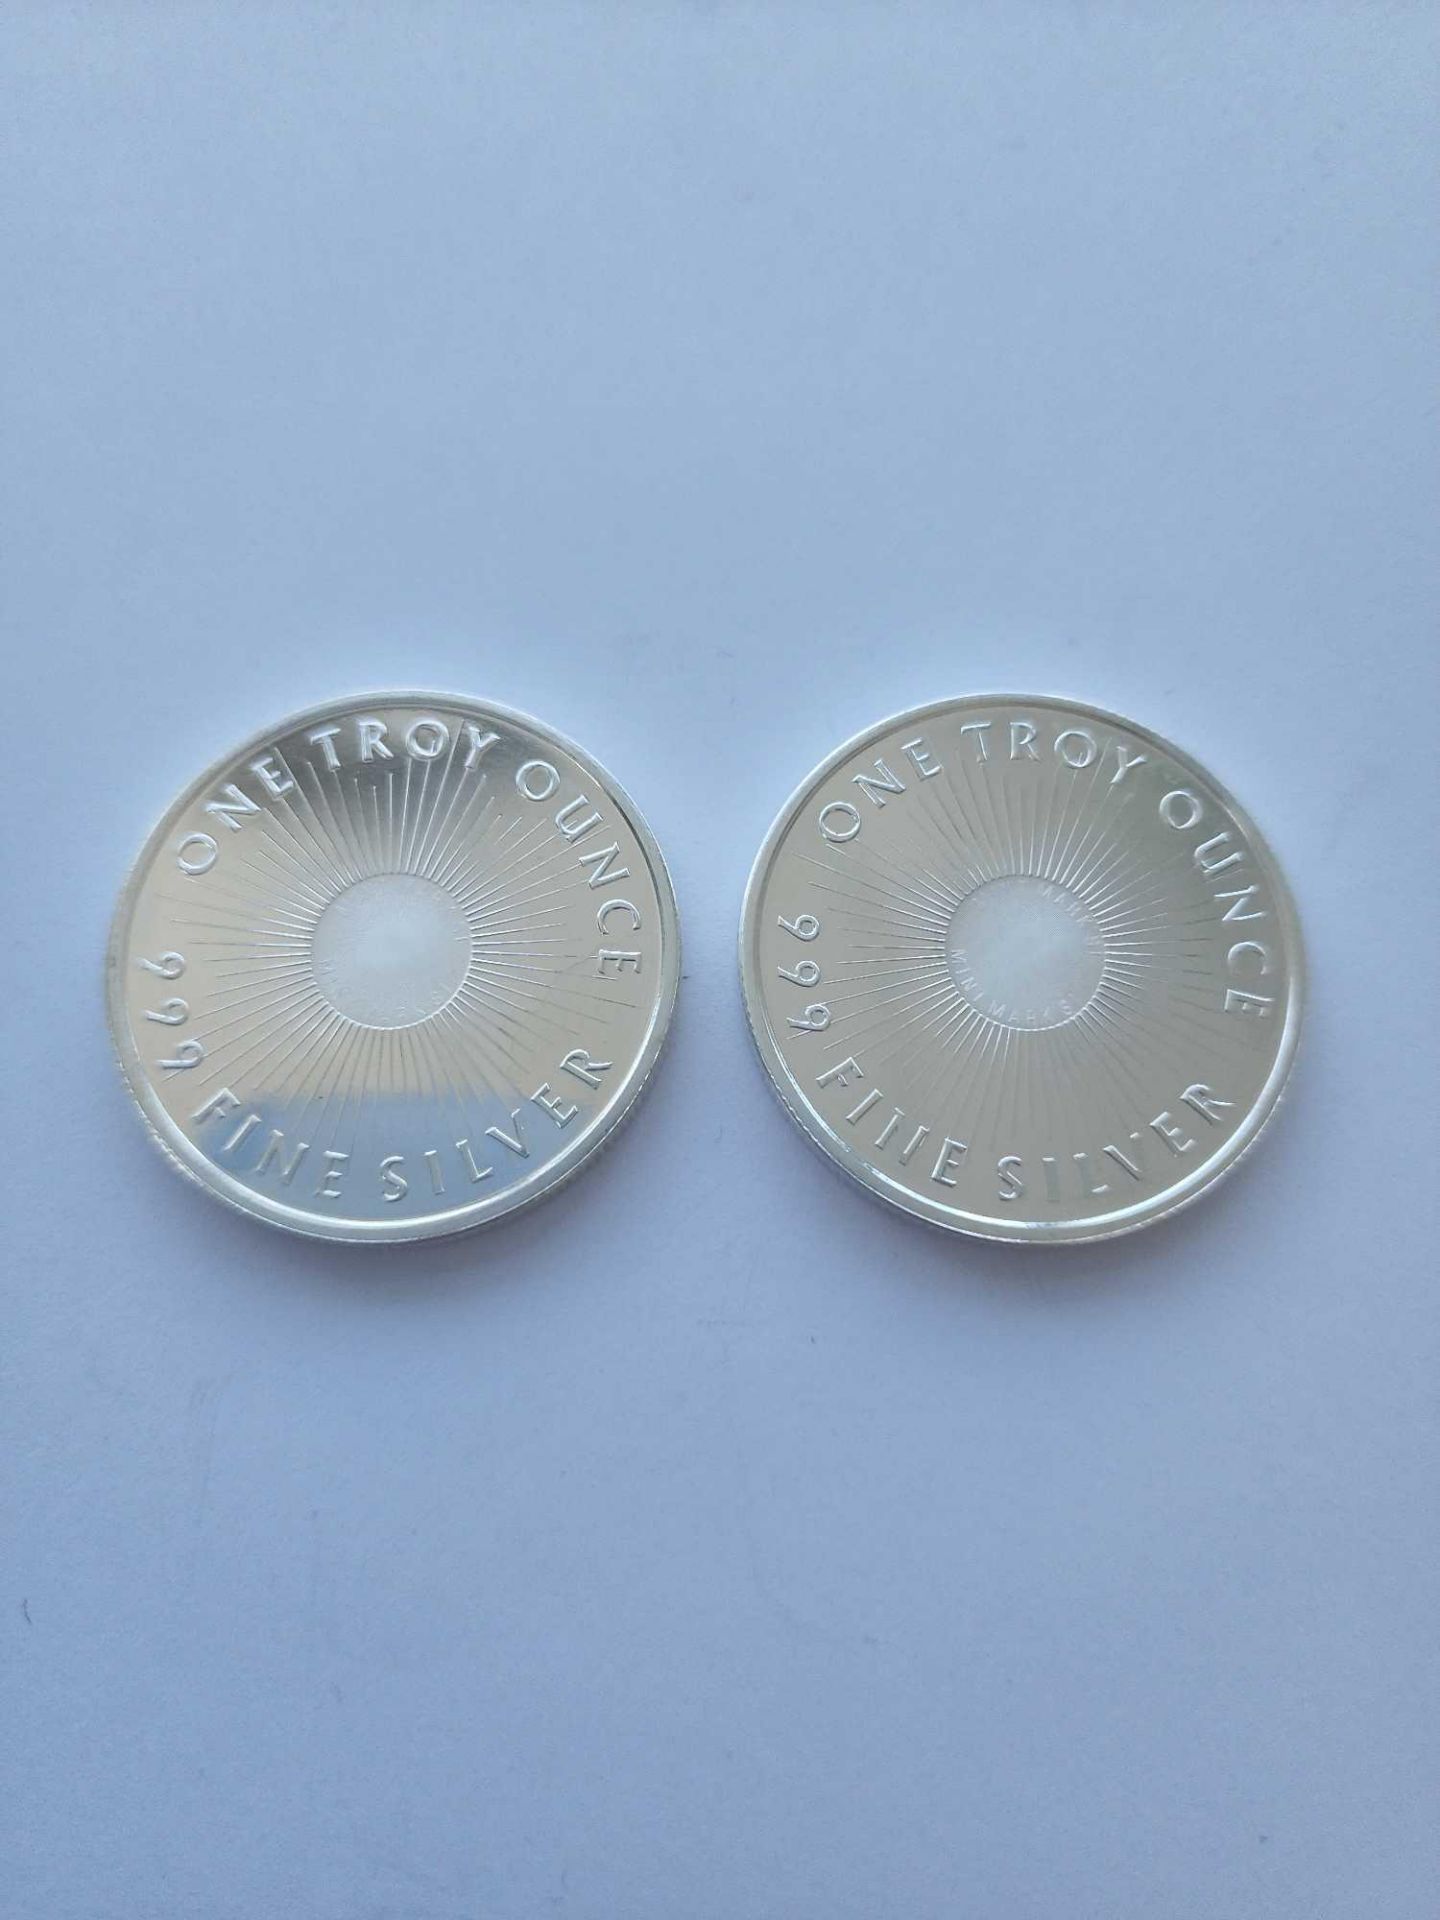 2 Sunshine Mint Silver Coins - Image 2 of 2